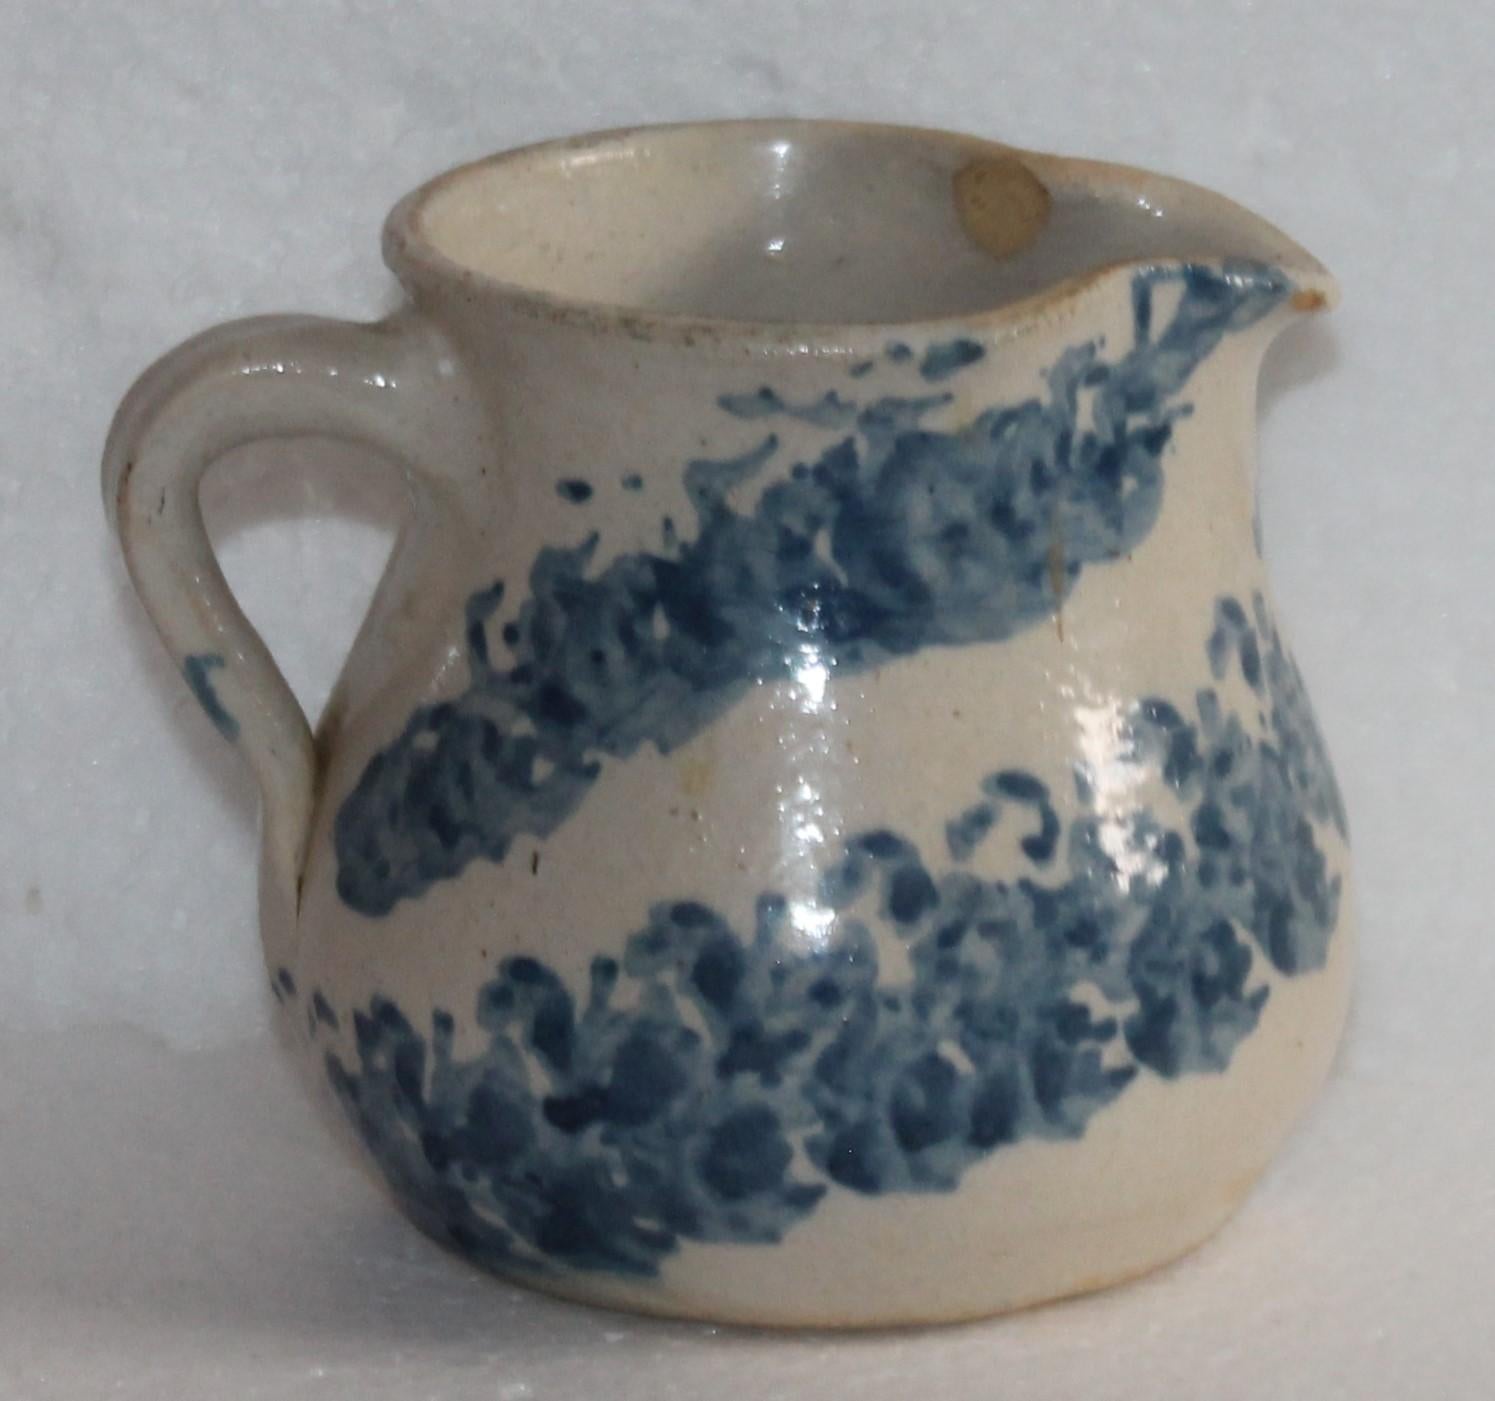 19th century rare form sponge ware milk pitcher in pottery. This is a handmade piece. The condition is very good with a minor small chip on the inner lip inside the pitcher near the spout. Very minor and not noticed from the outside.